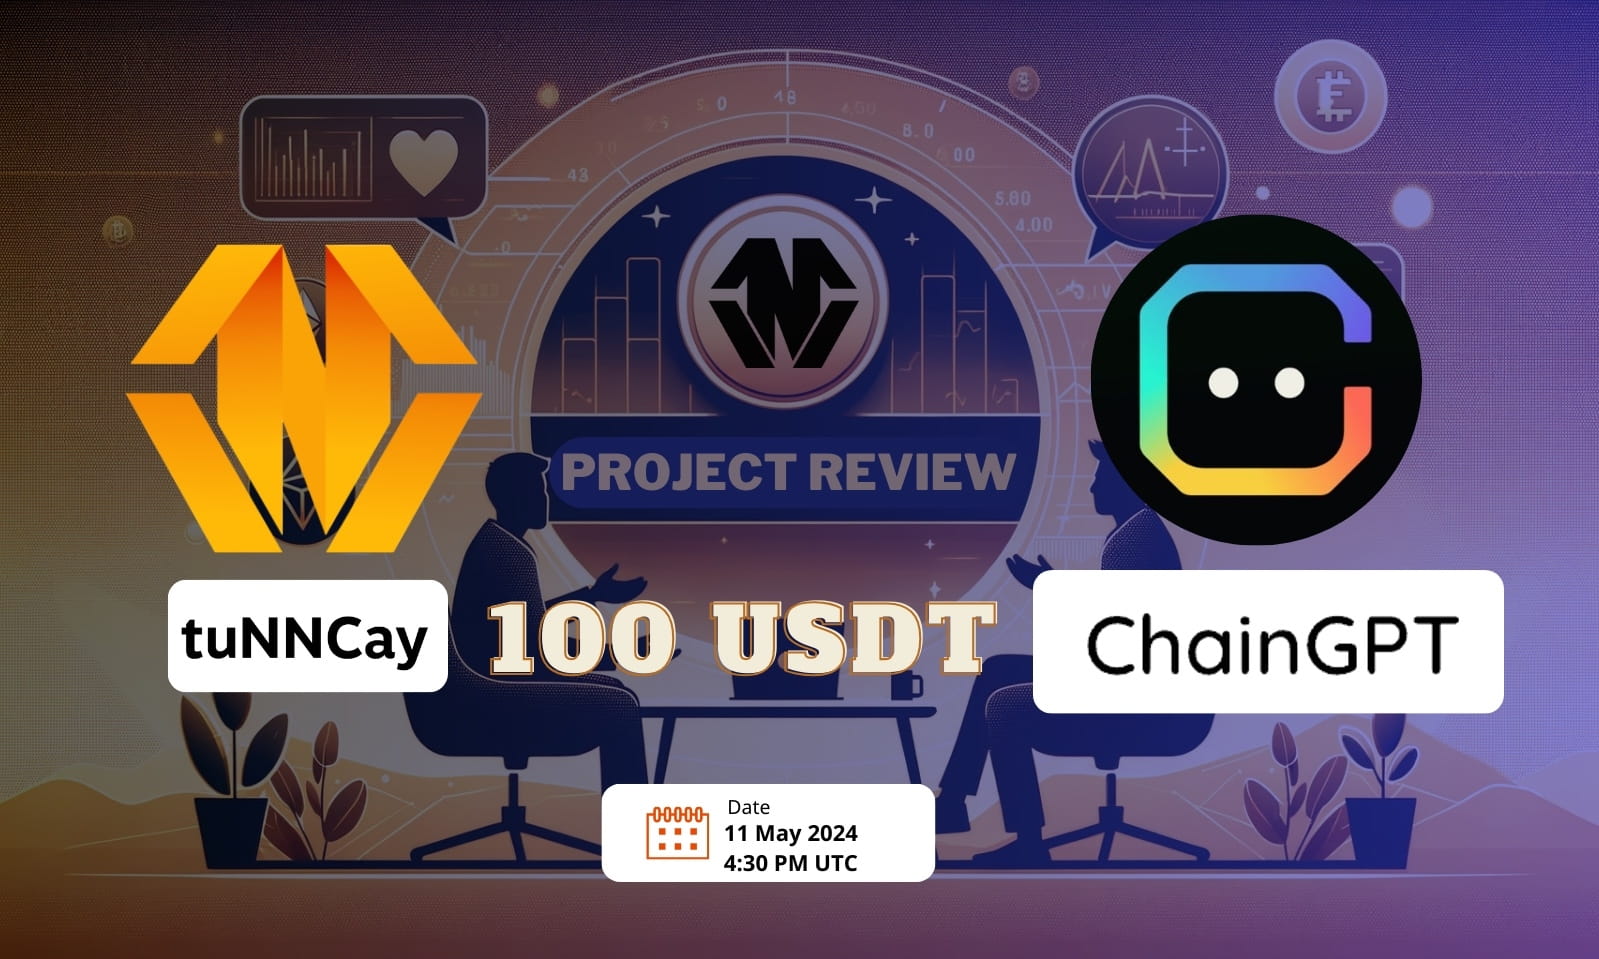 ChainGPT Project Review